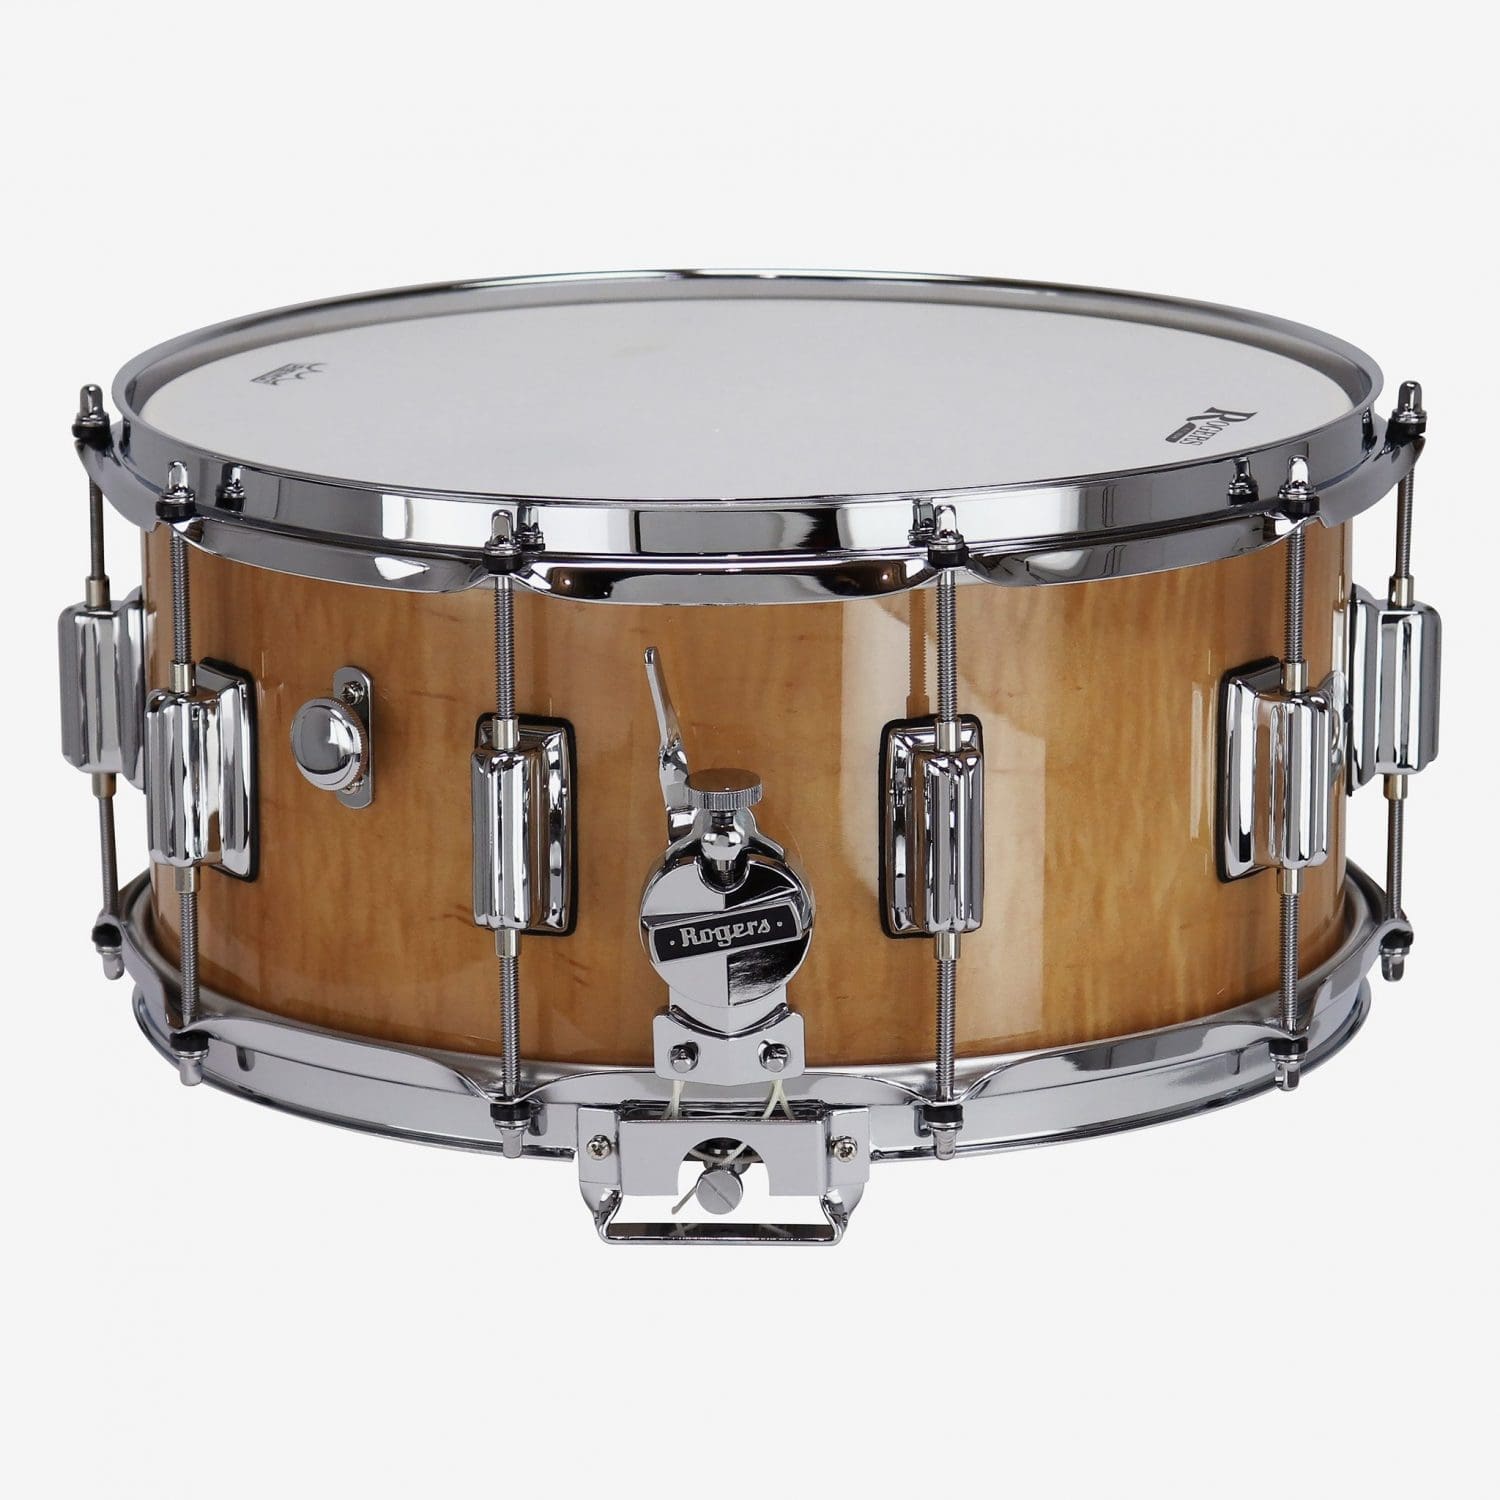 Wildwood Curly Maple Dyna-Sonic Snare Drum